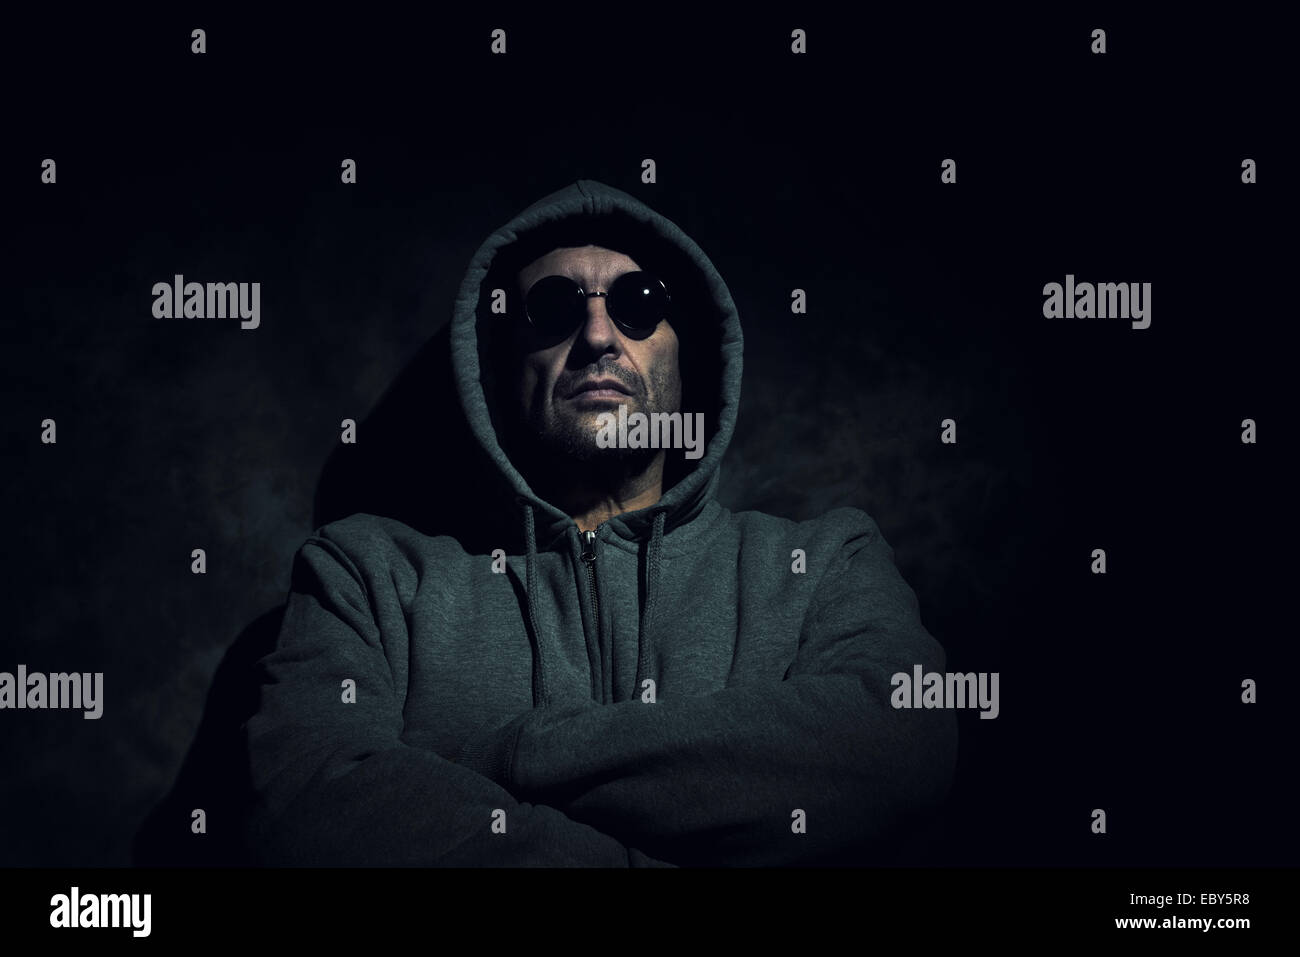 Mysterious, sinister man with black sunglasses Stock Photo